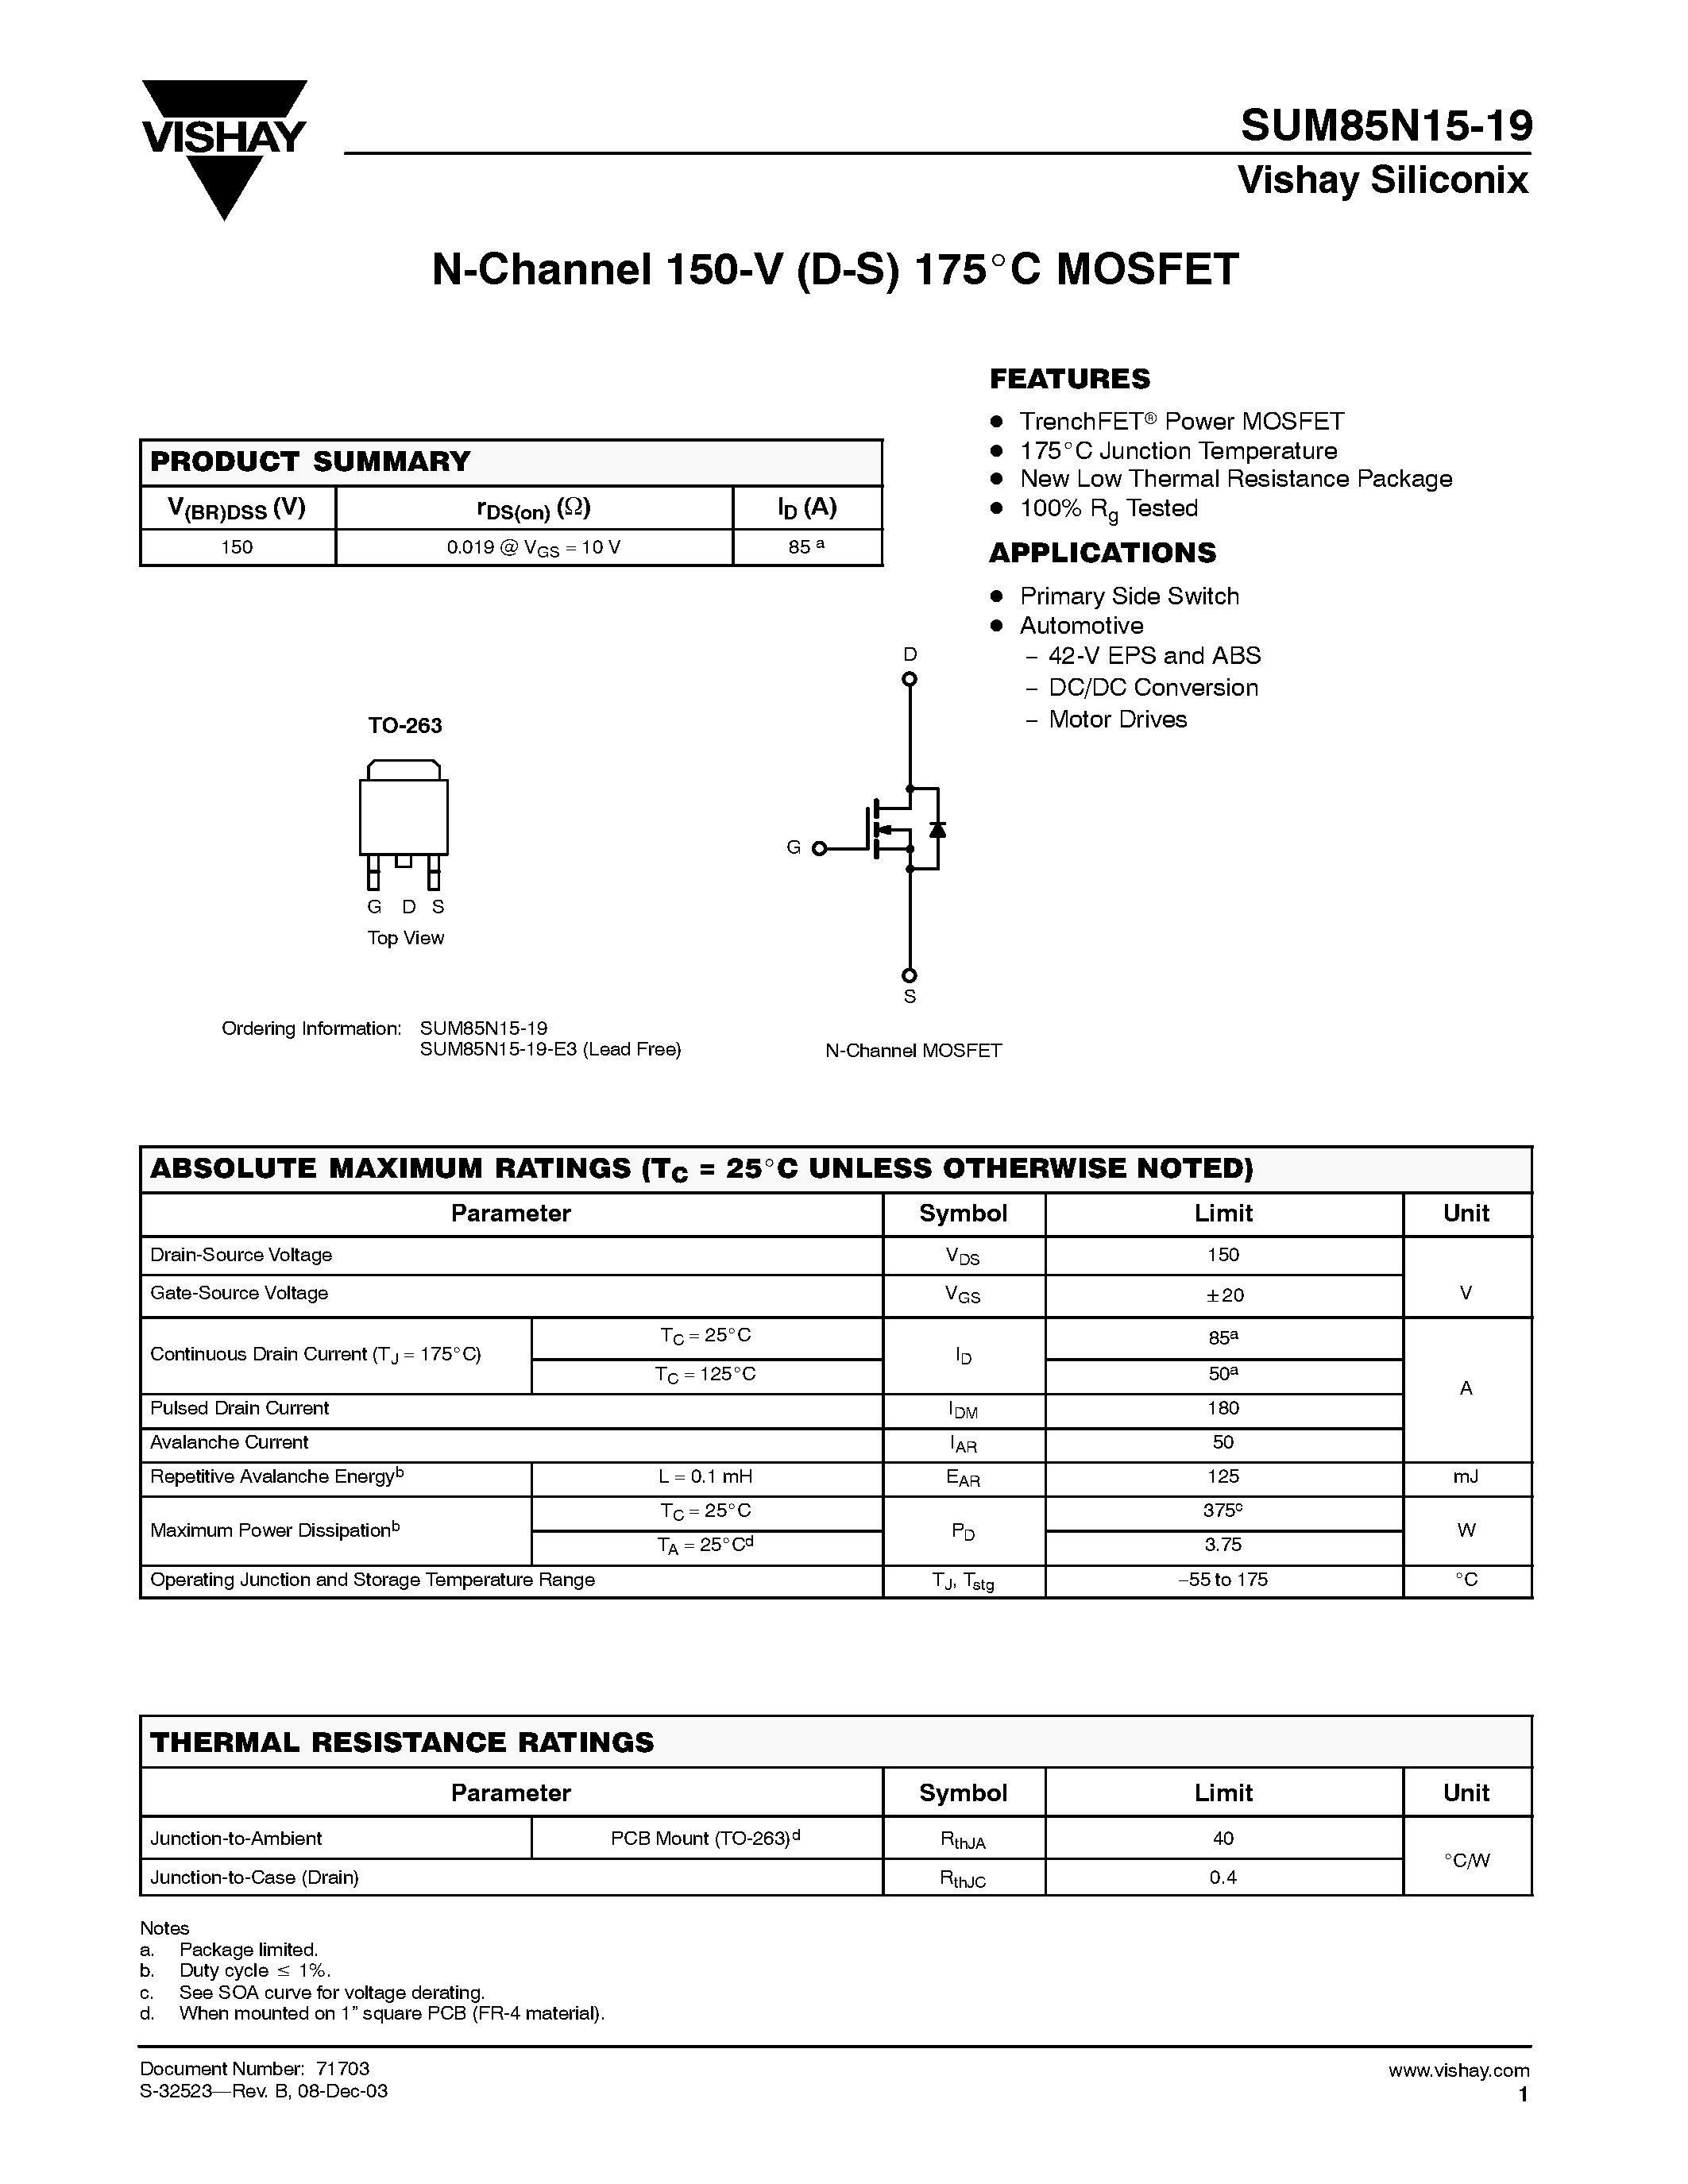 Datasheet SUM85N15-19 - N-Channel 150-V (D-S) 175 C MOSFET page 1